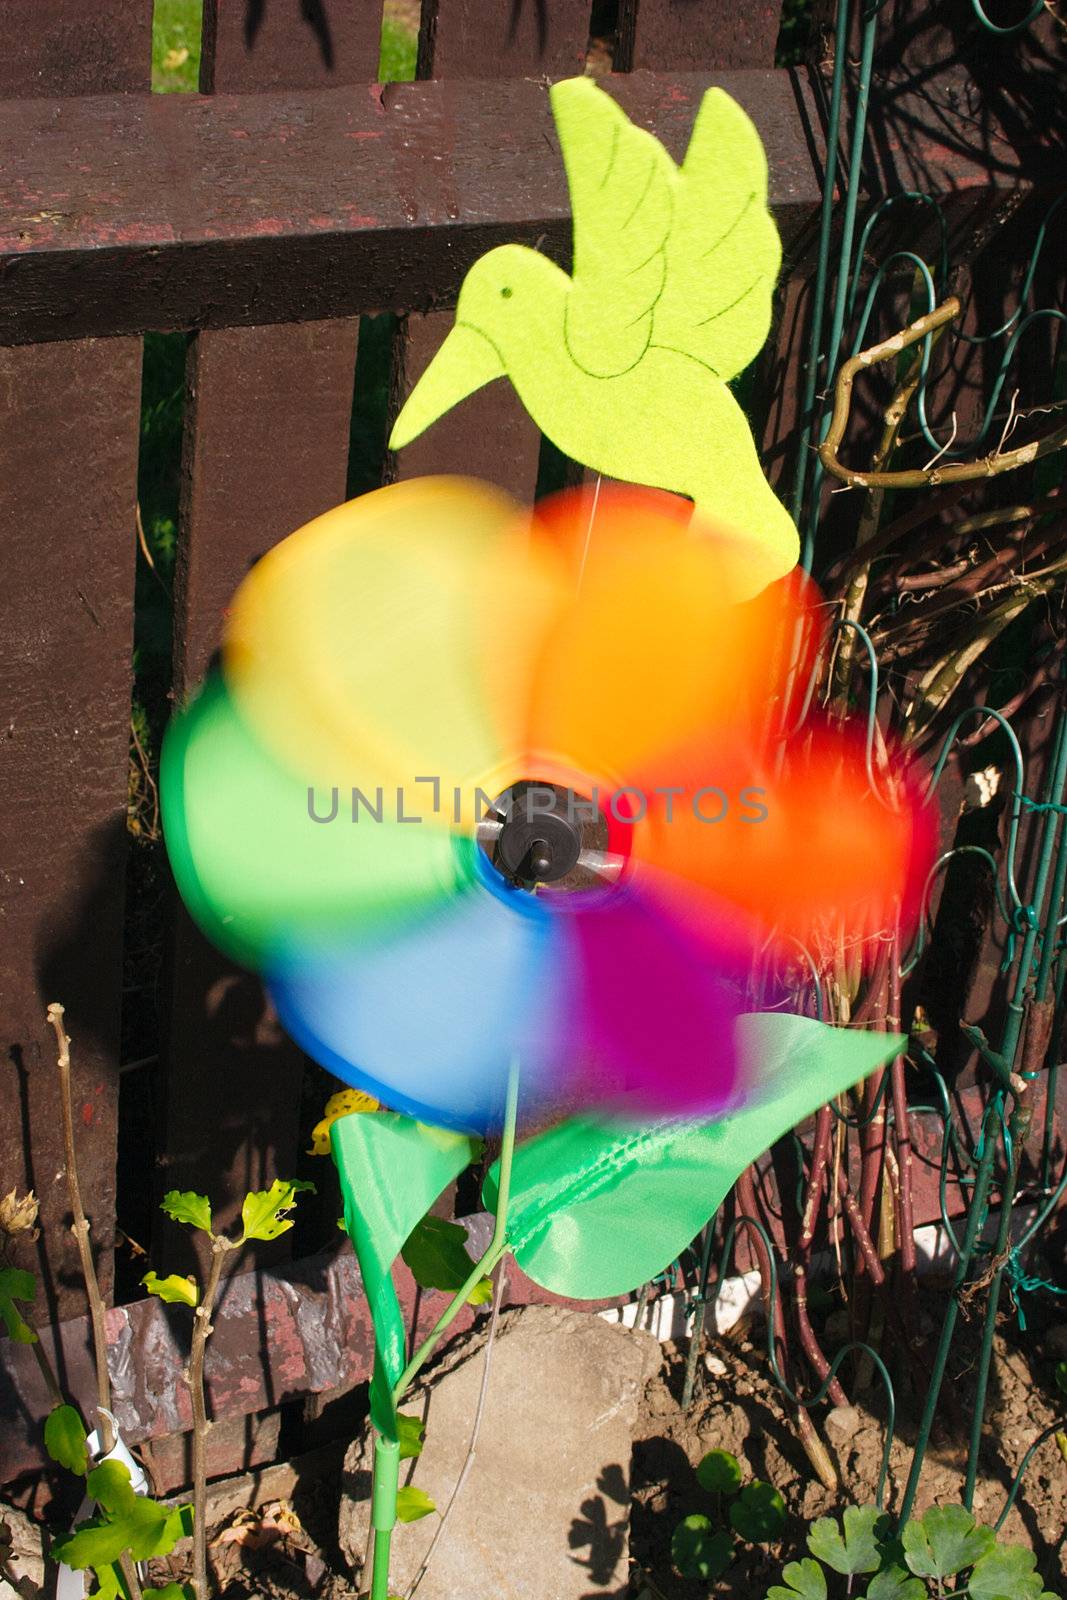 colorful windmill spinning in the wind by leafy